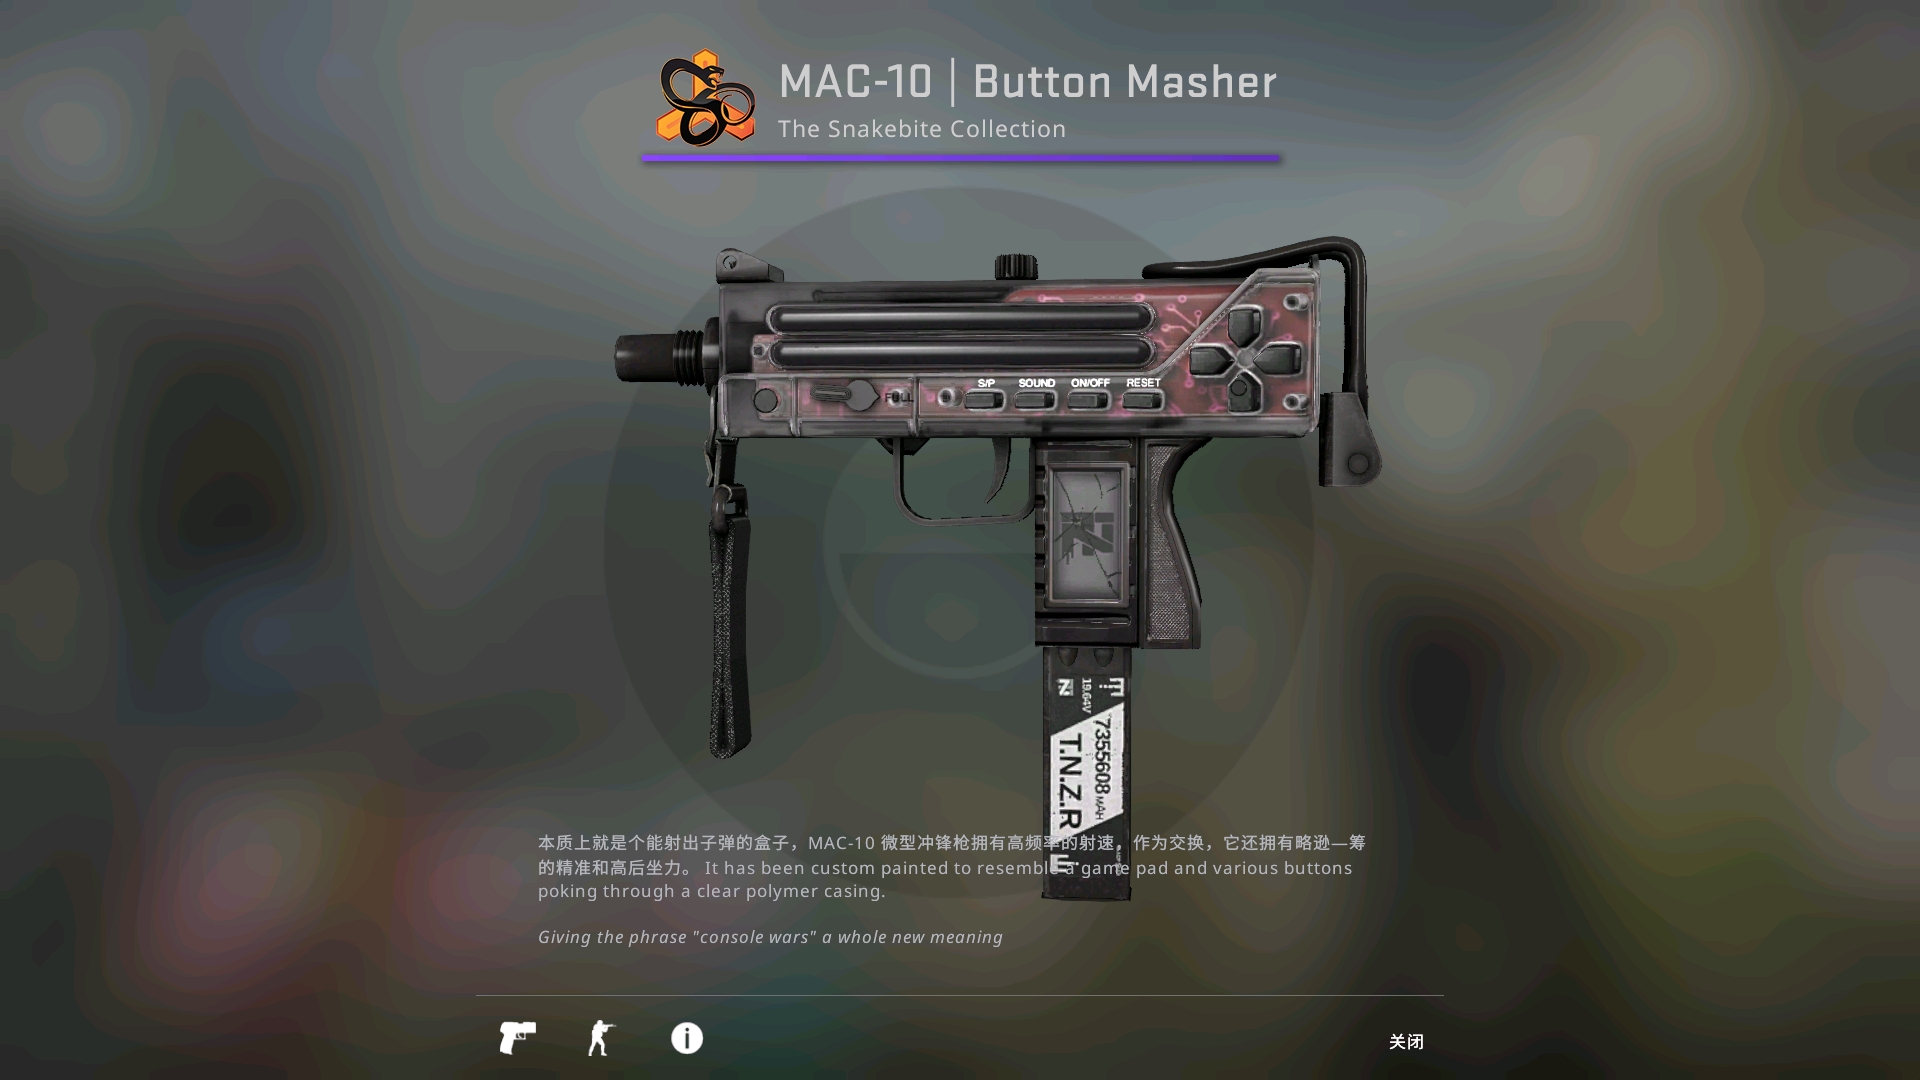 download the new for windows MAC-10 Button Masher cs go skin